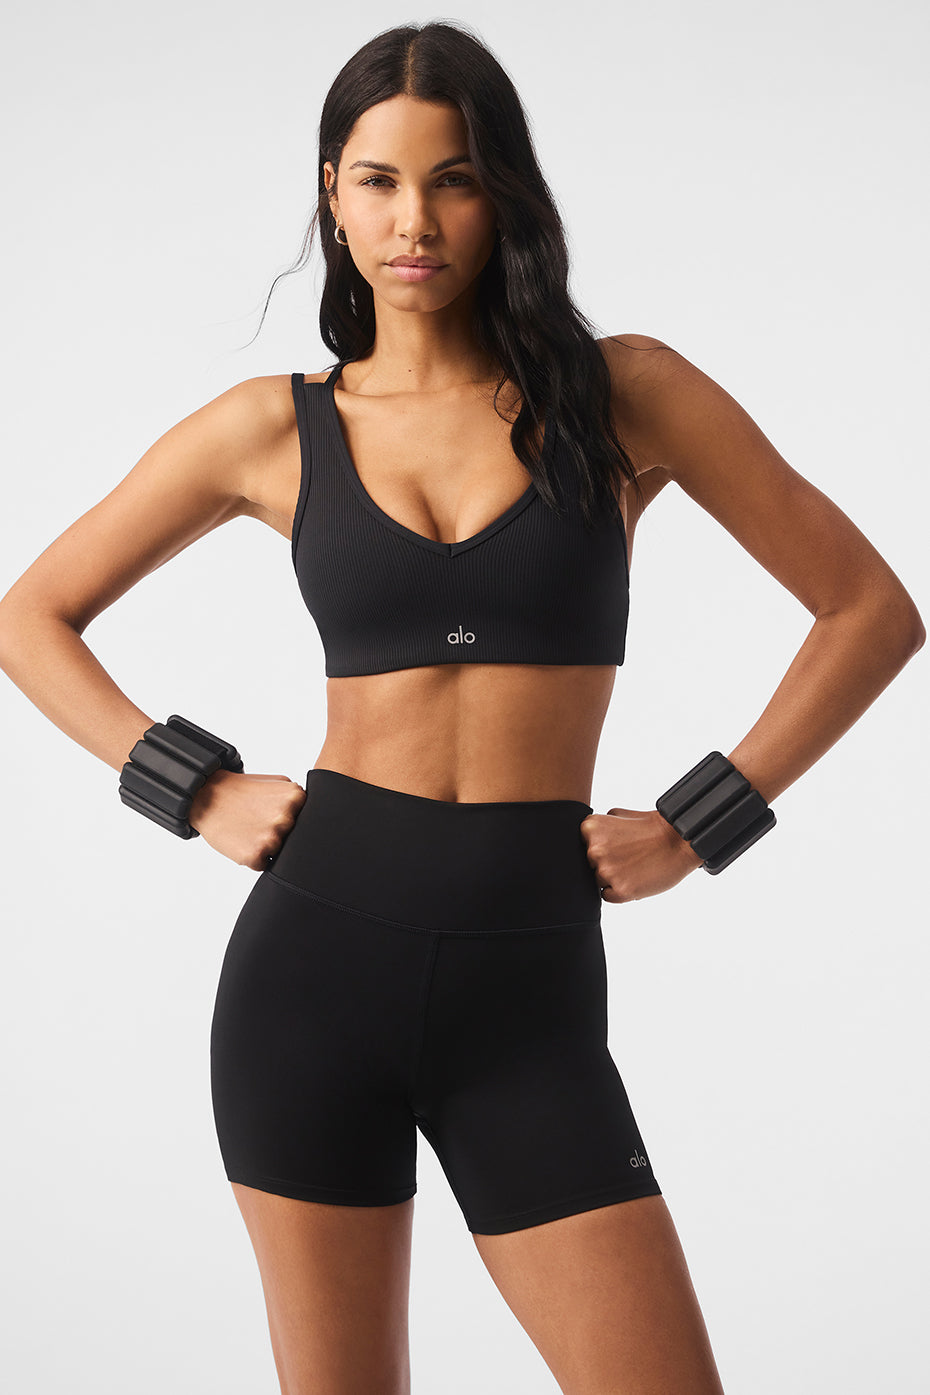 NEW $72 Alo Movement Sports Bra with Lace-up Back in Black [SZ Small ]  #P378